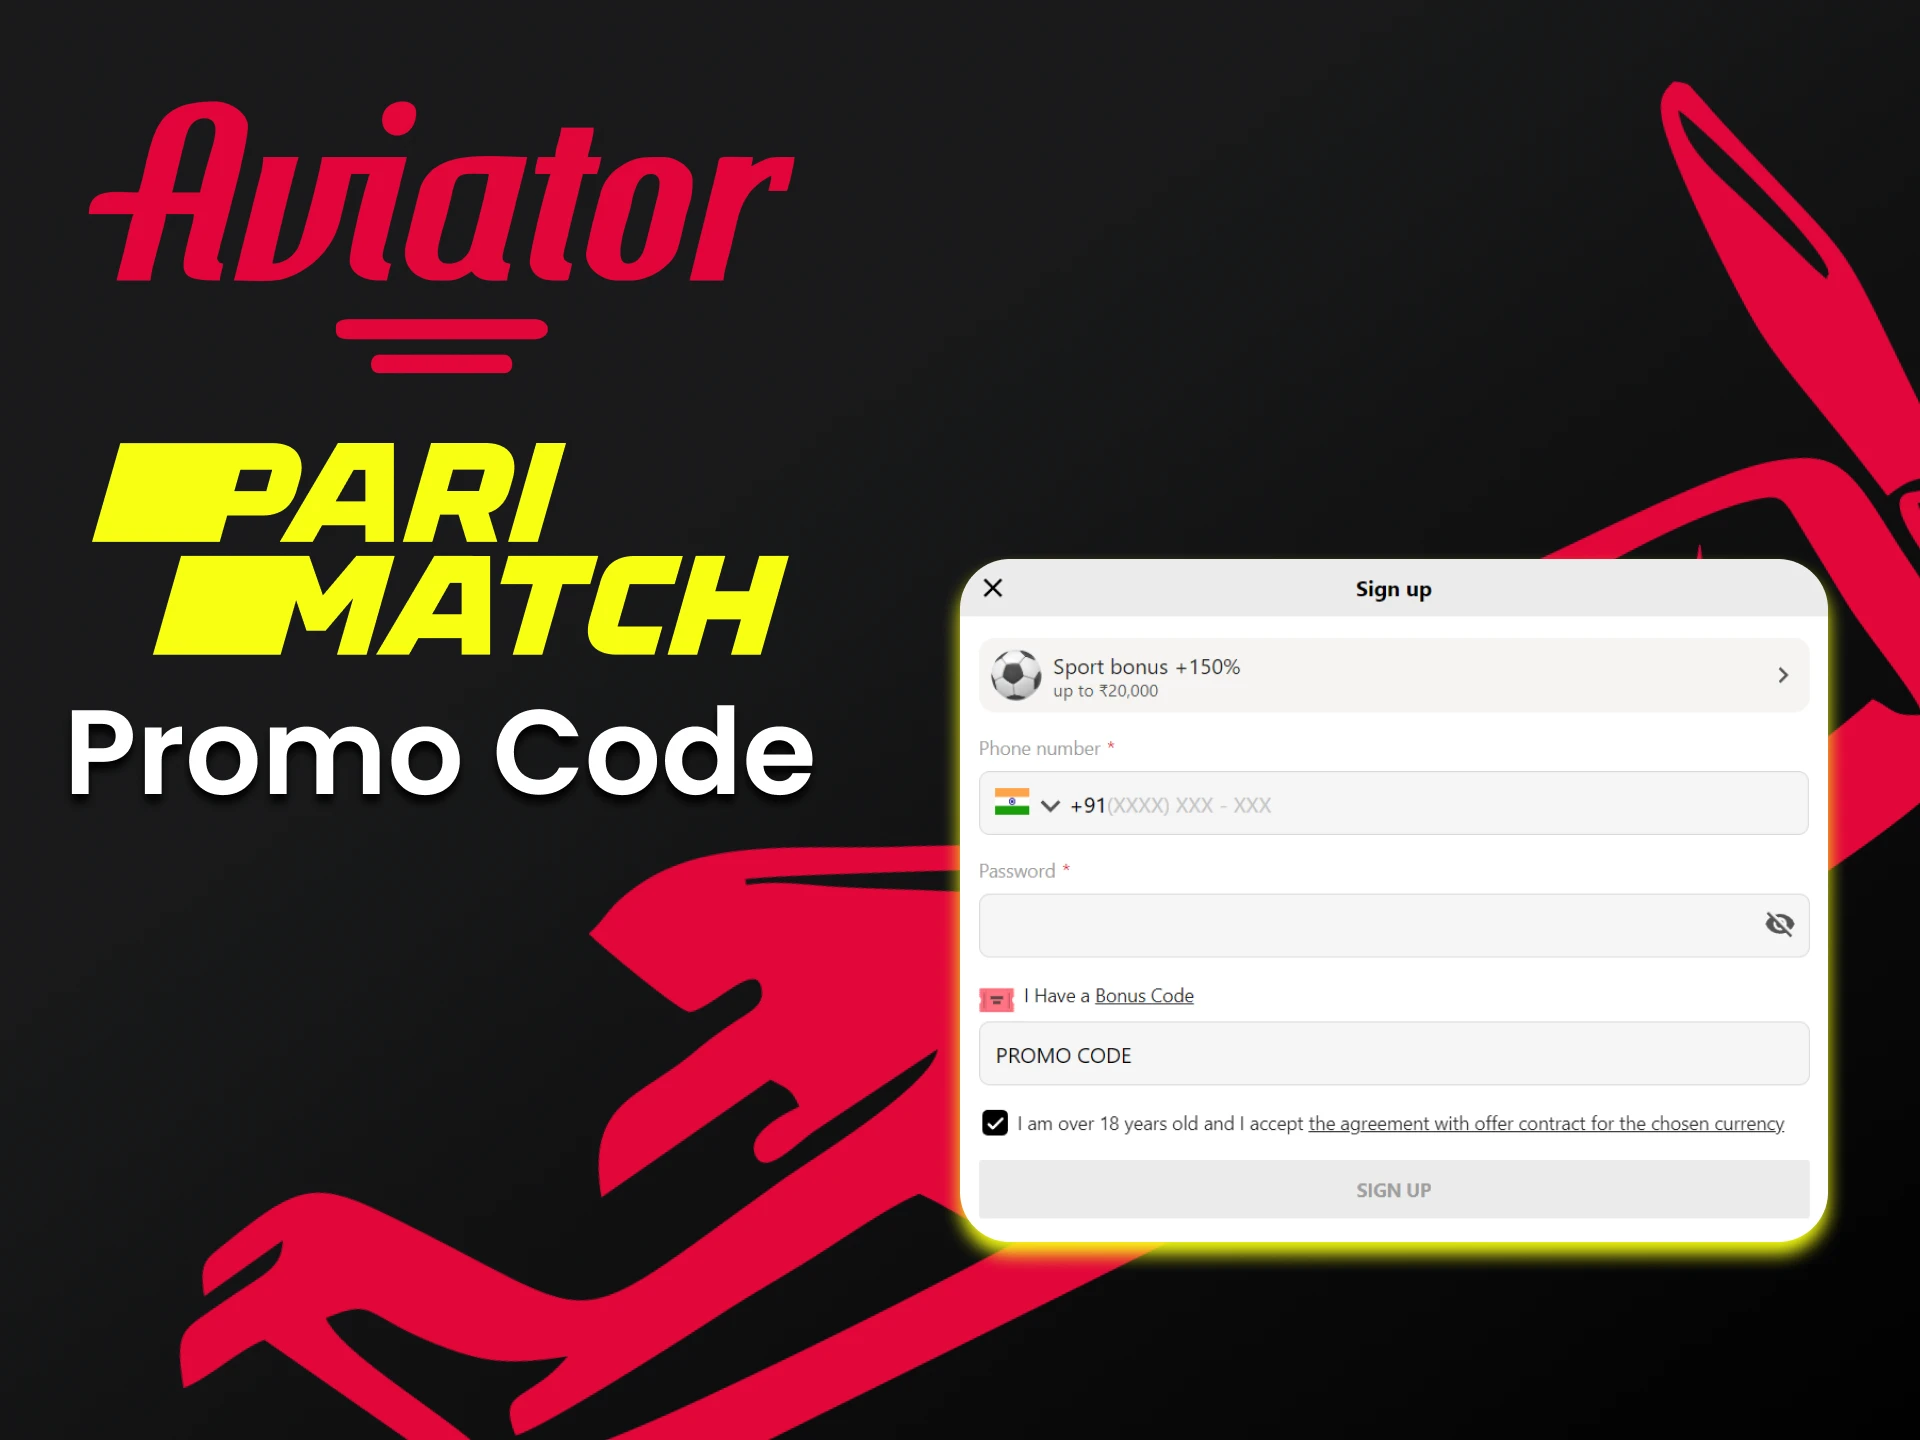 Use a special code to receive a bonus from Parimatch.